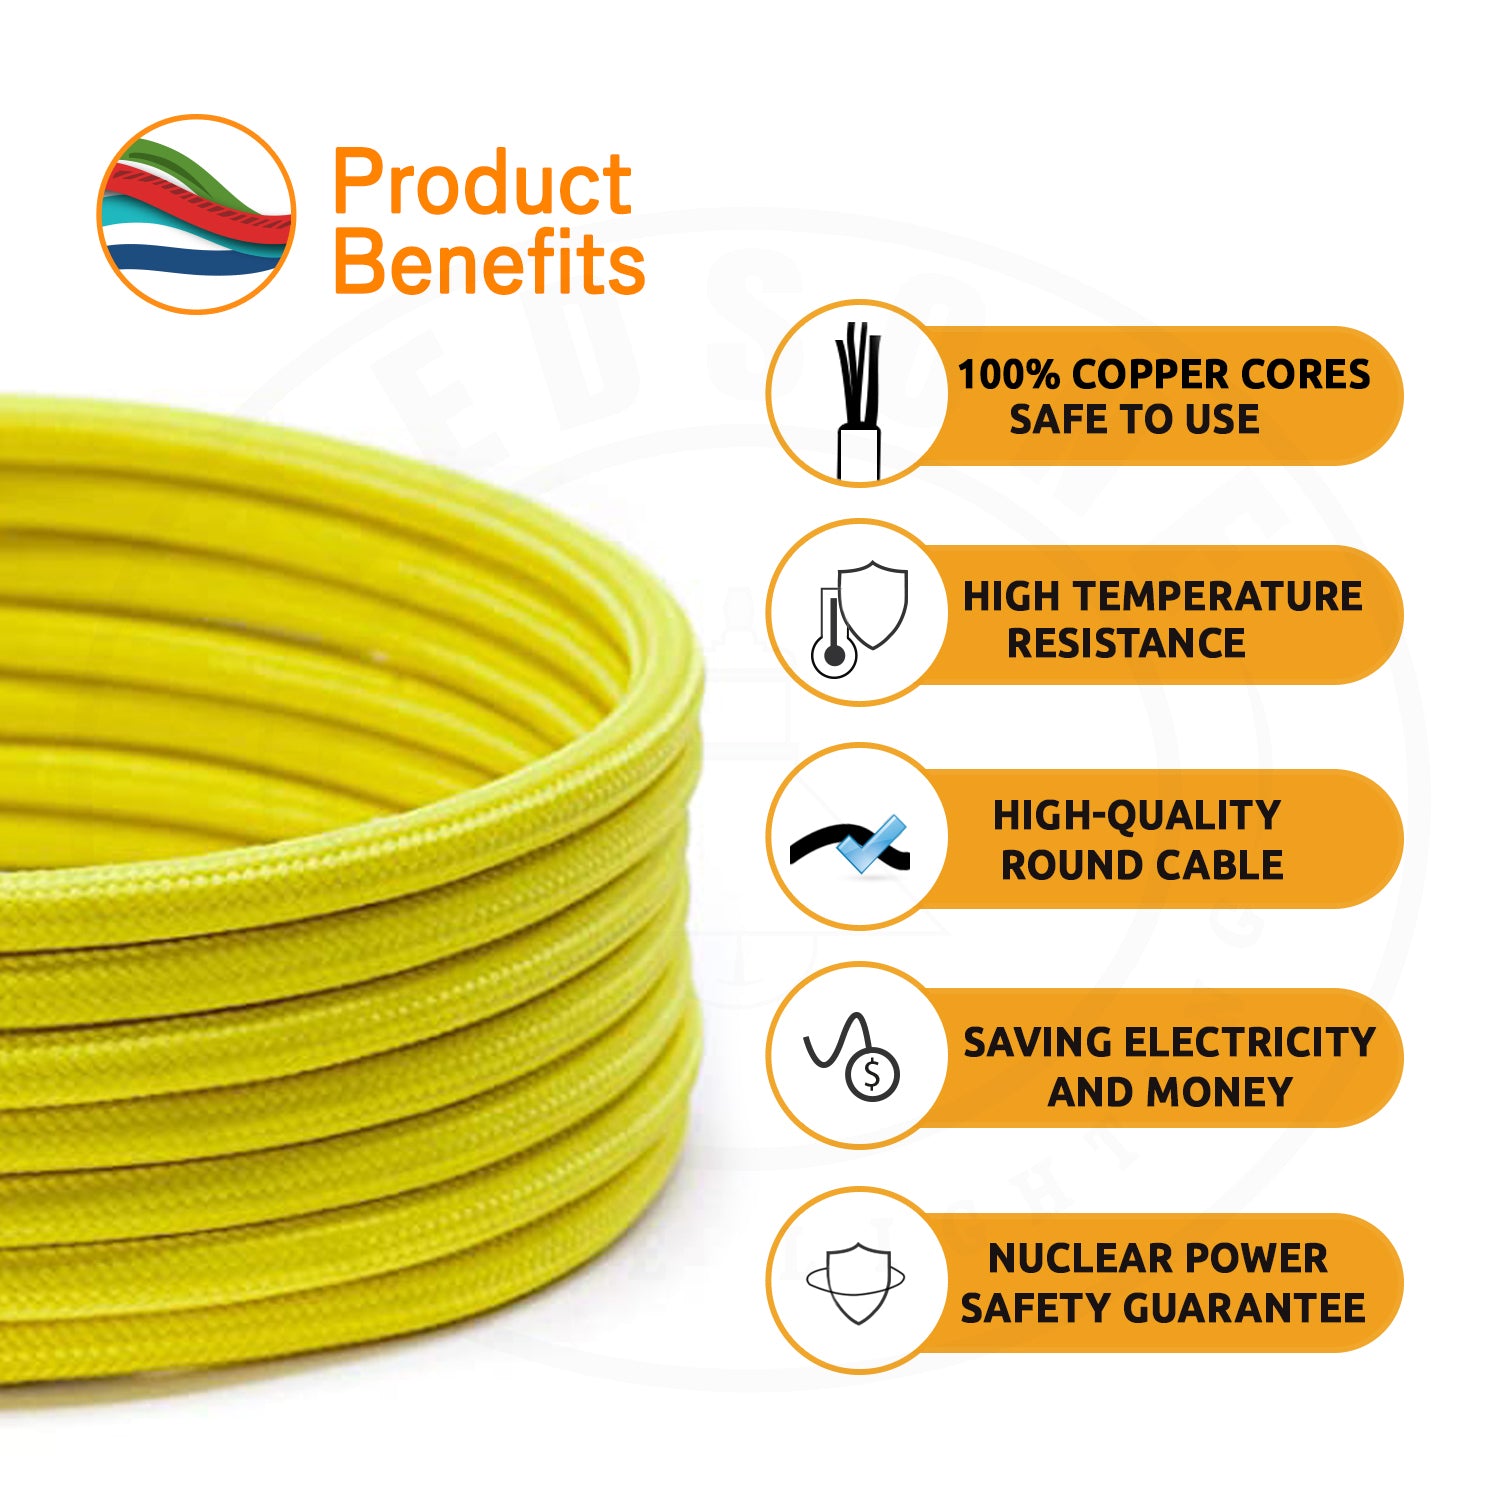 3-Core Round Cable in yellow.JPG